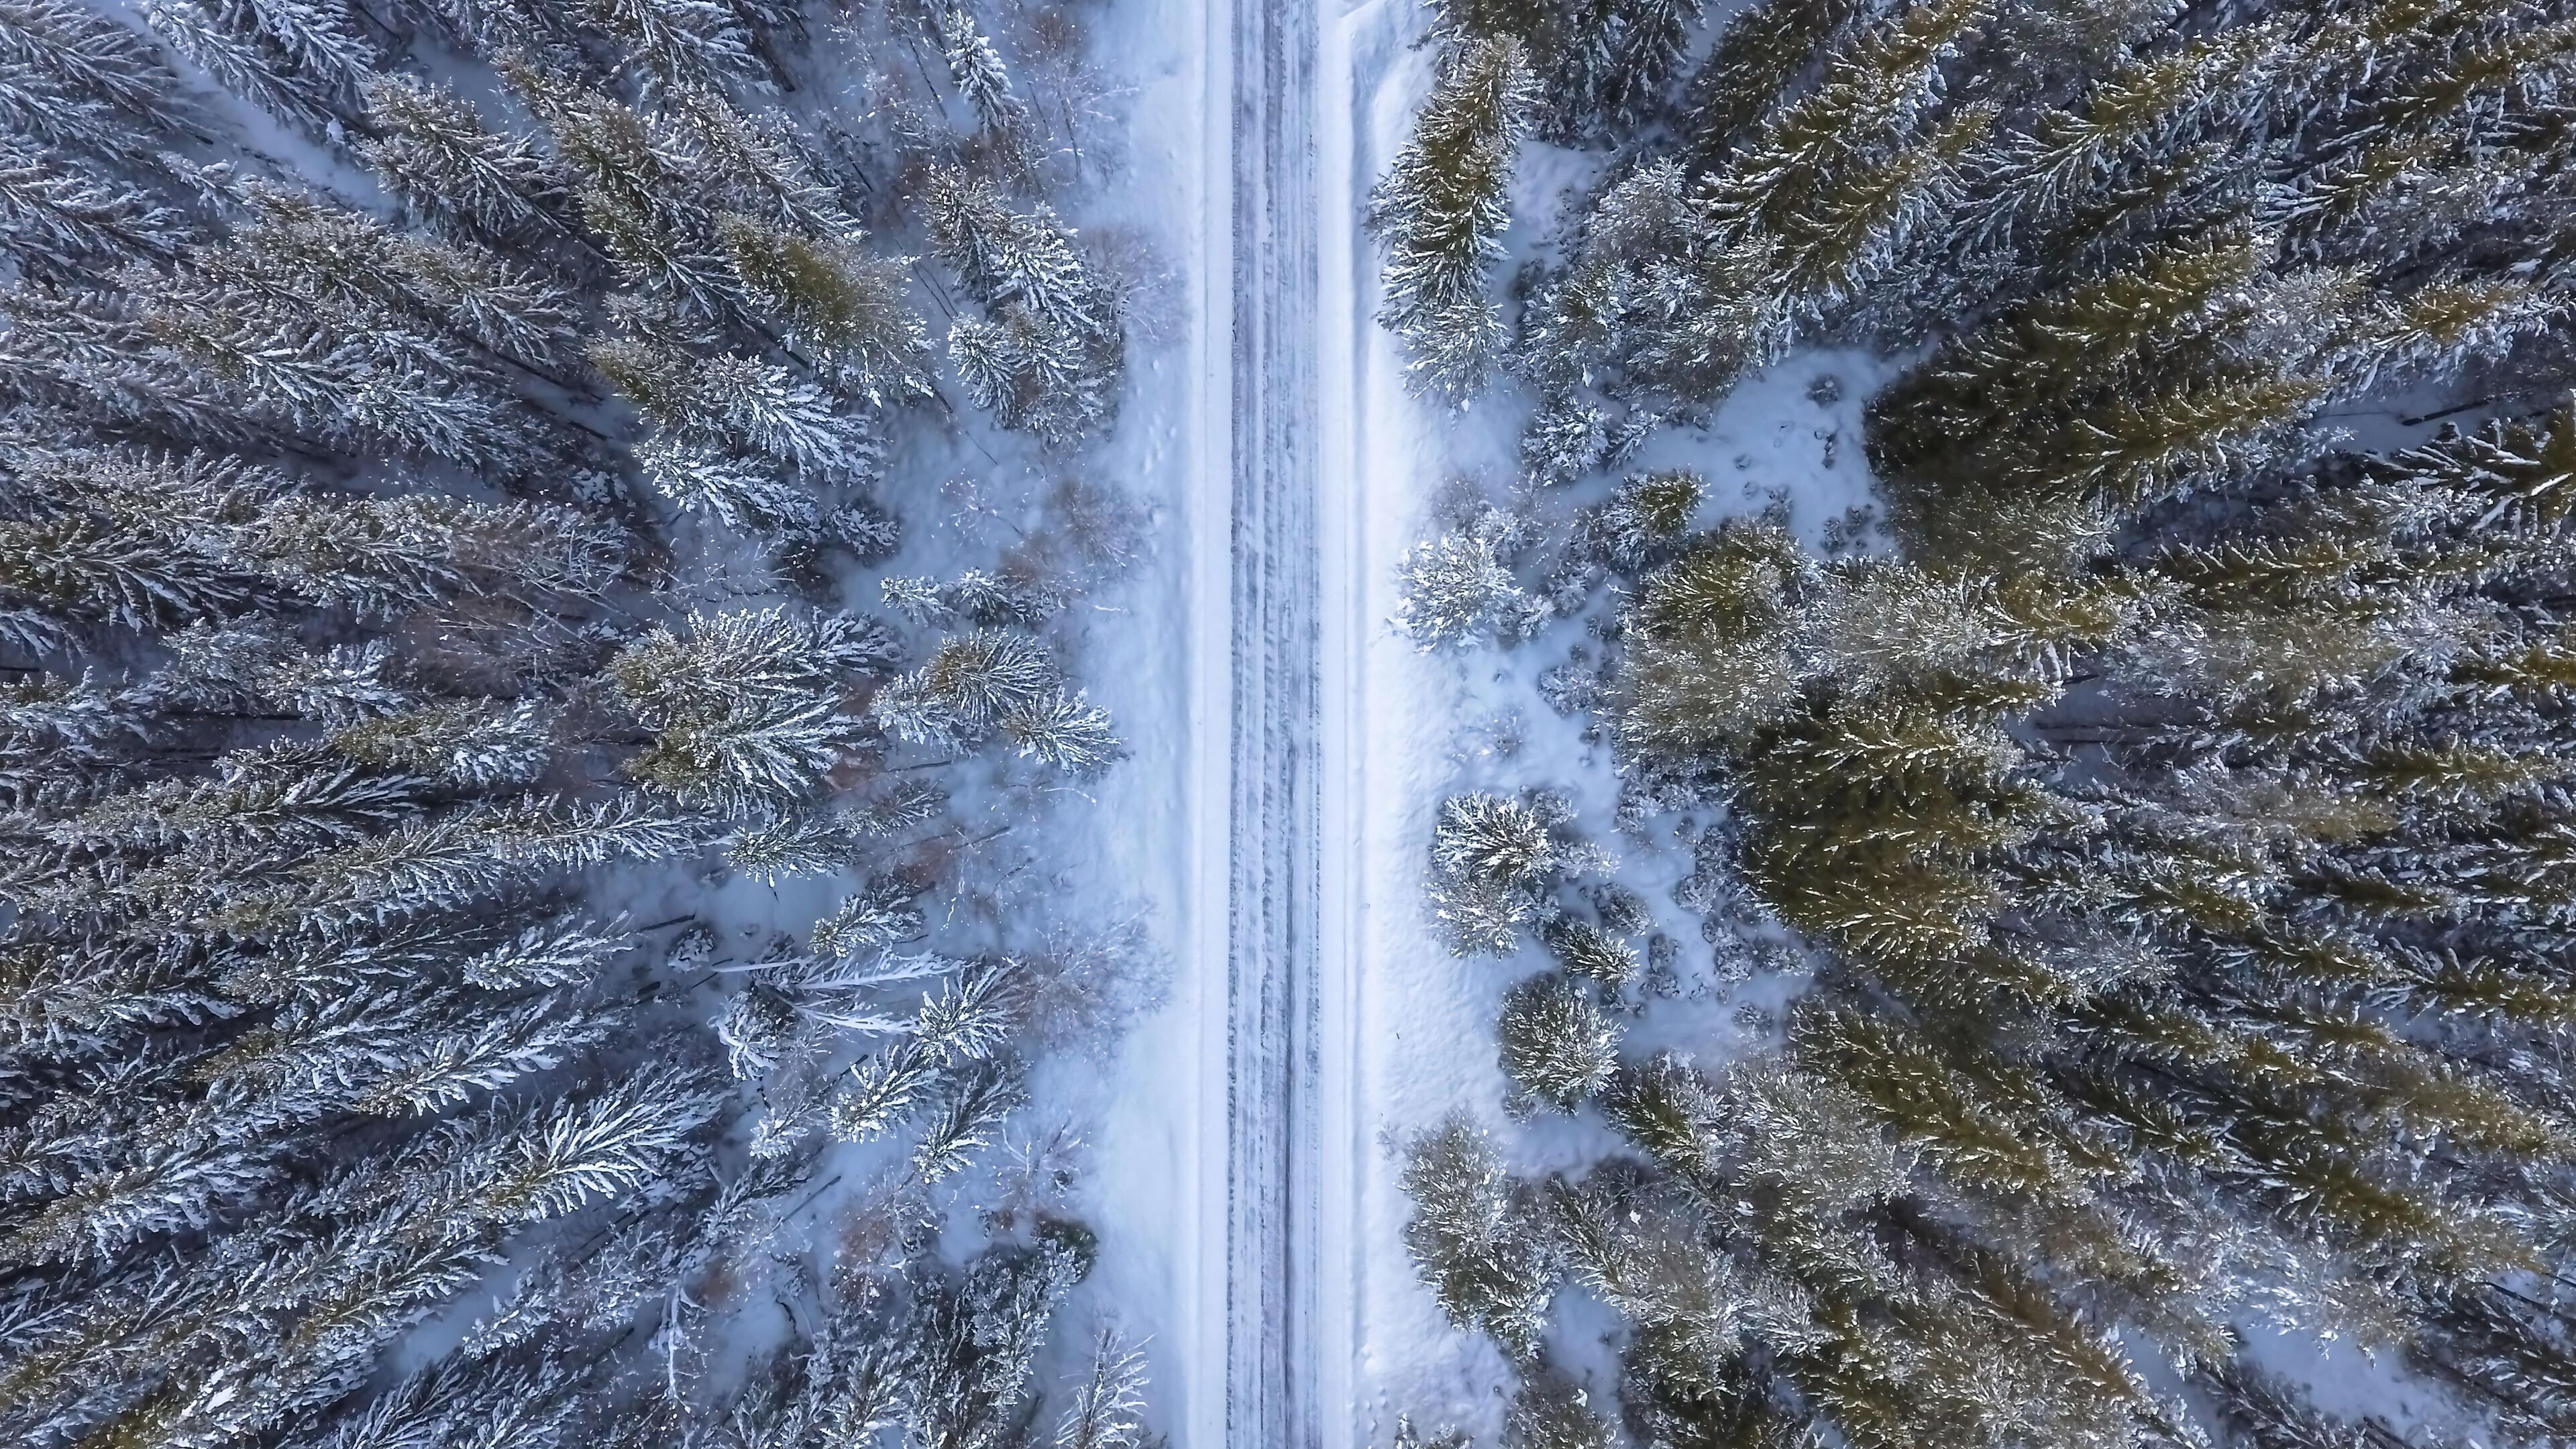 HD wallpaper, Aerial View, Wallpaper, 4K, Nature, Winter, Forest, Scenery, Hd